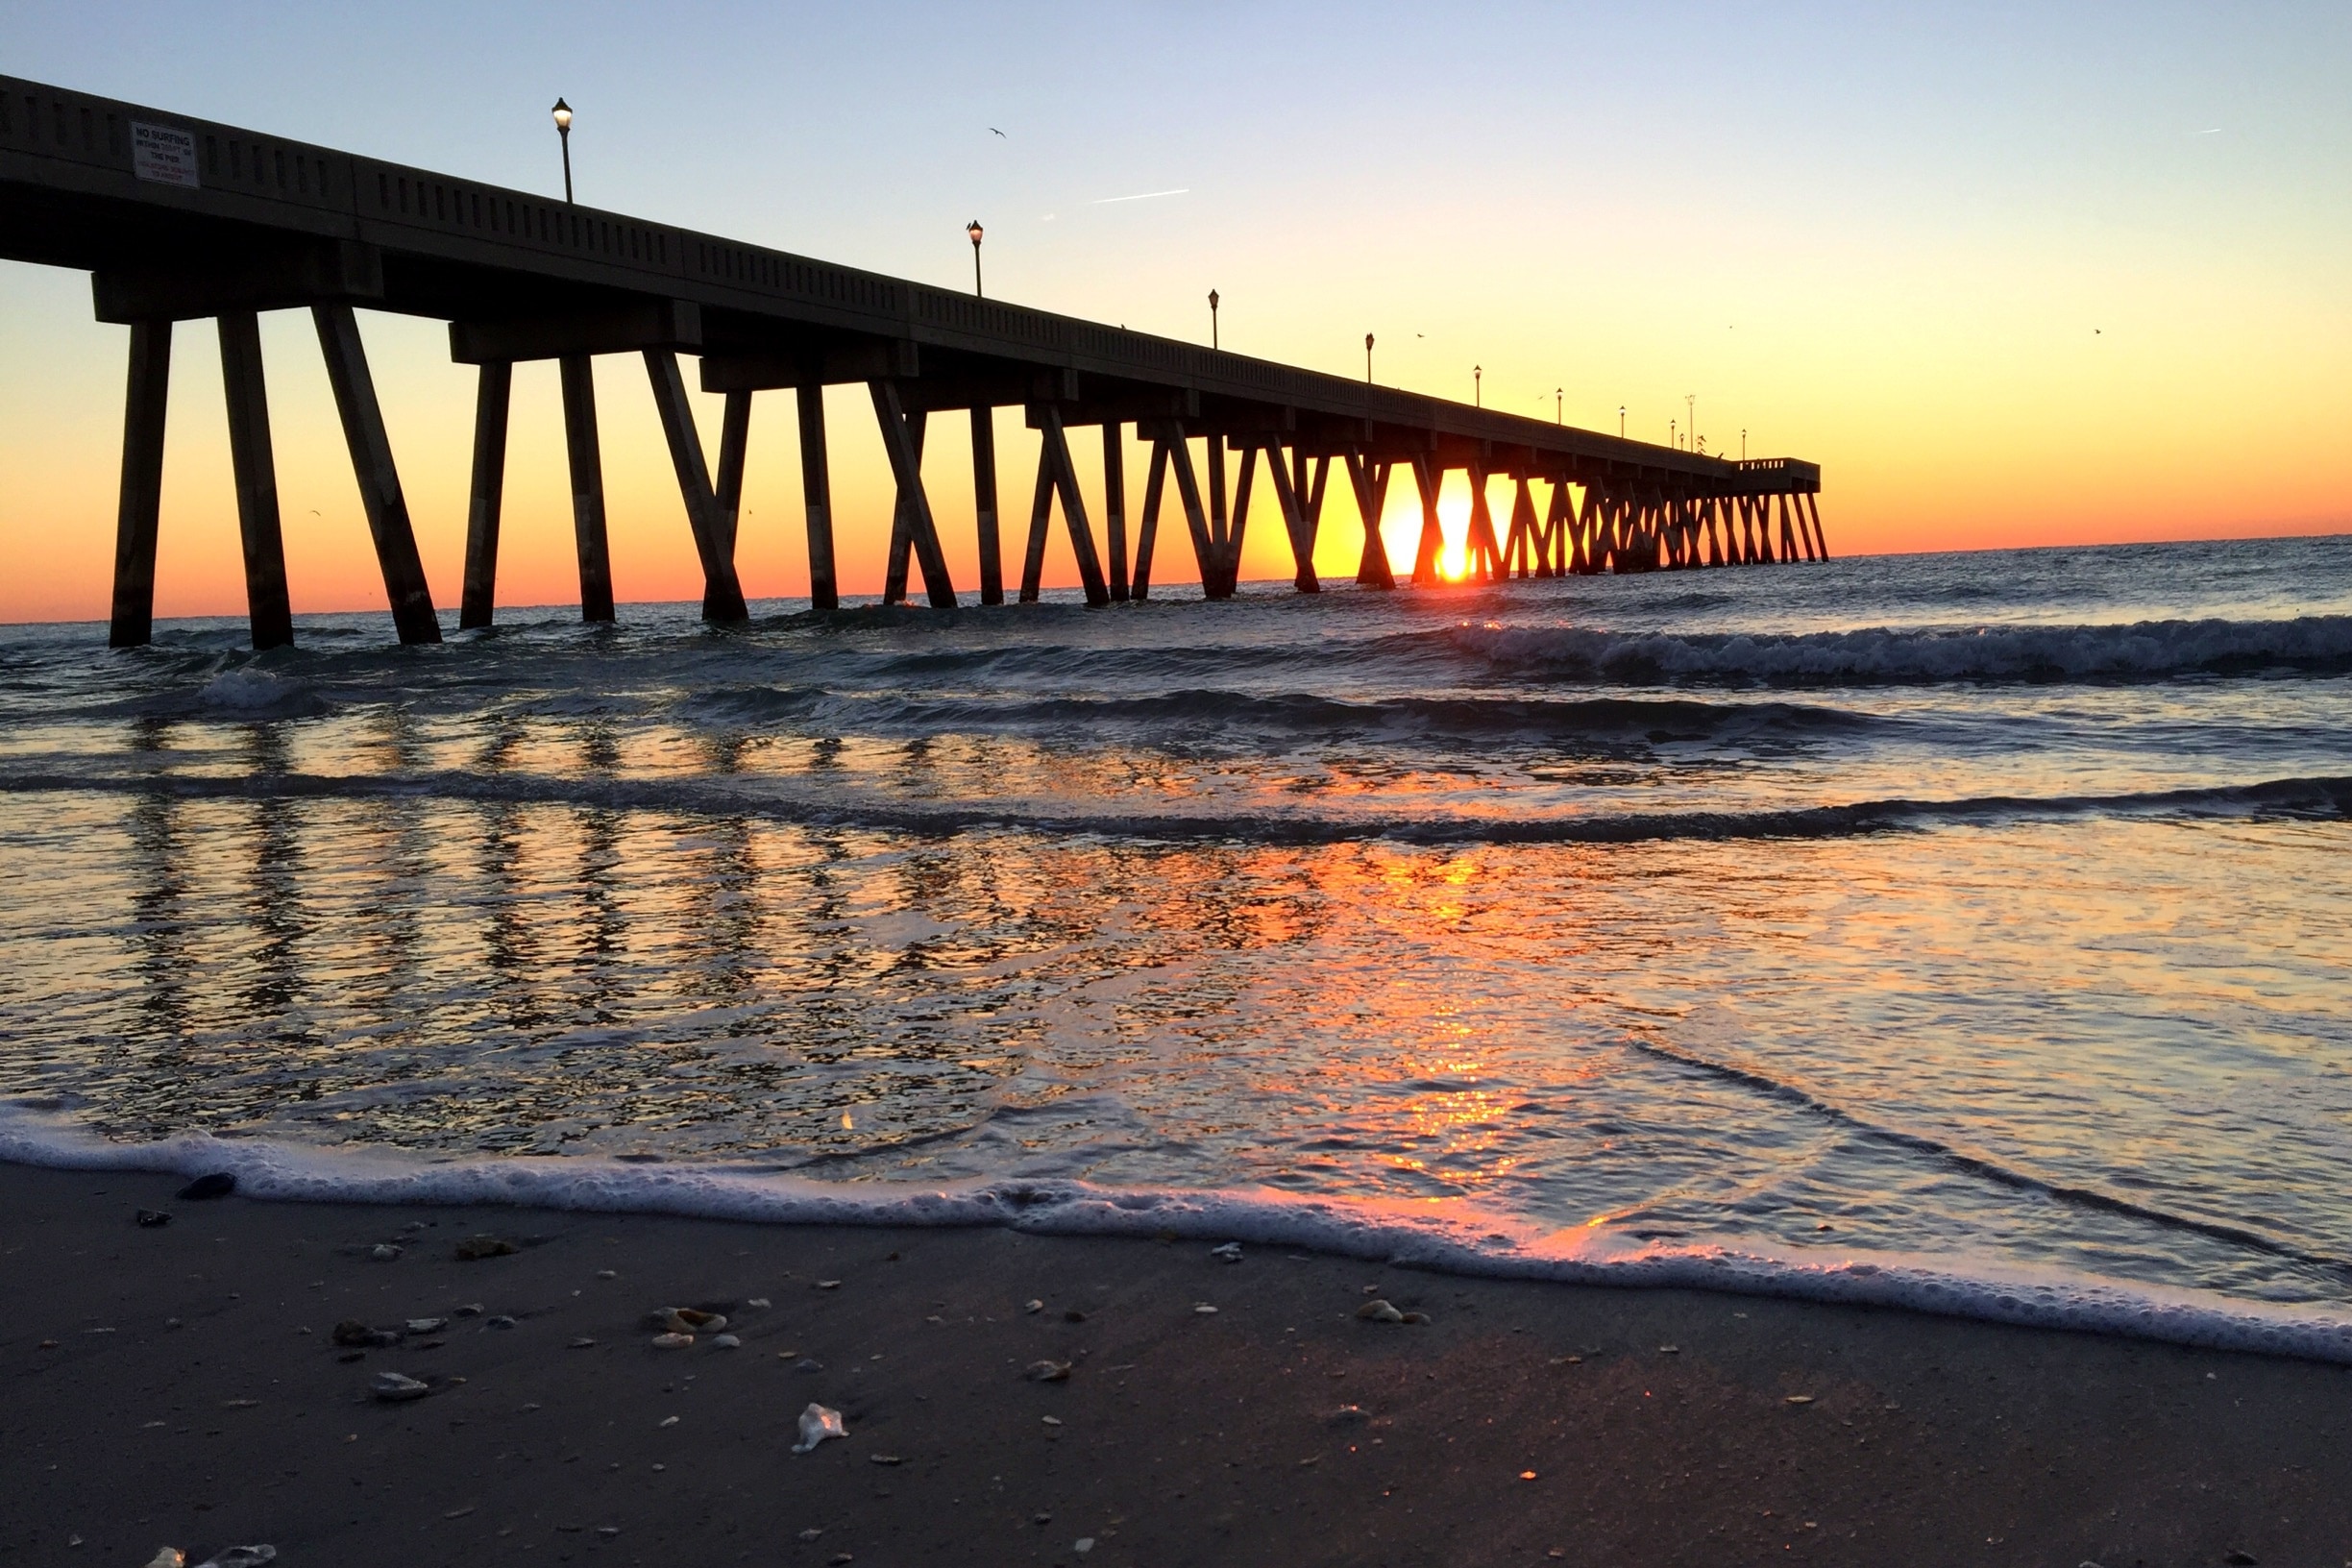 This pier makes for great sunrise photos. $2 to walk out onto it but totally worth it. Lots of avid fishermen to entertain you AND they sell beer and other beverages to carry out there with you. The Wilmington/Wrightsville Beach is a great area to visit with numerous excellent breweries and many great restaurants. 